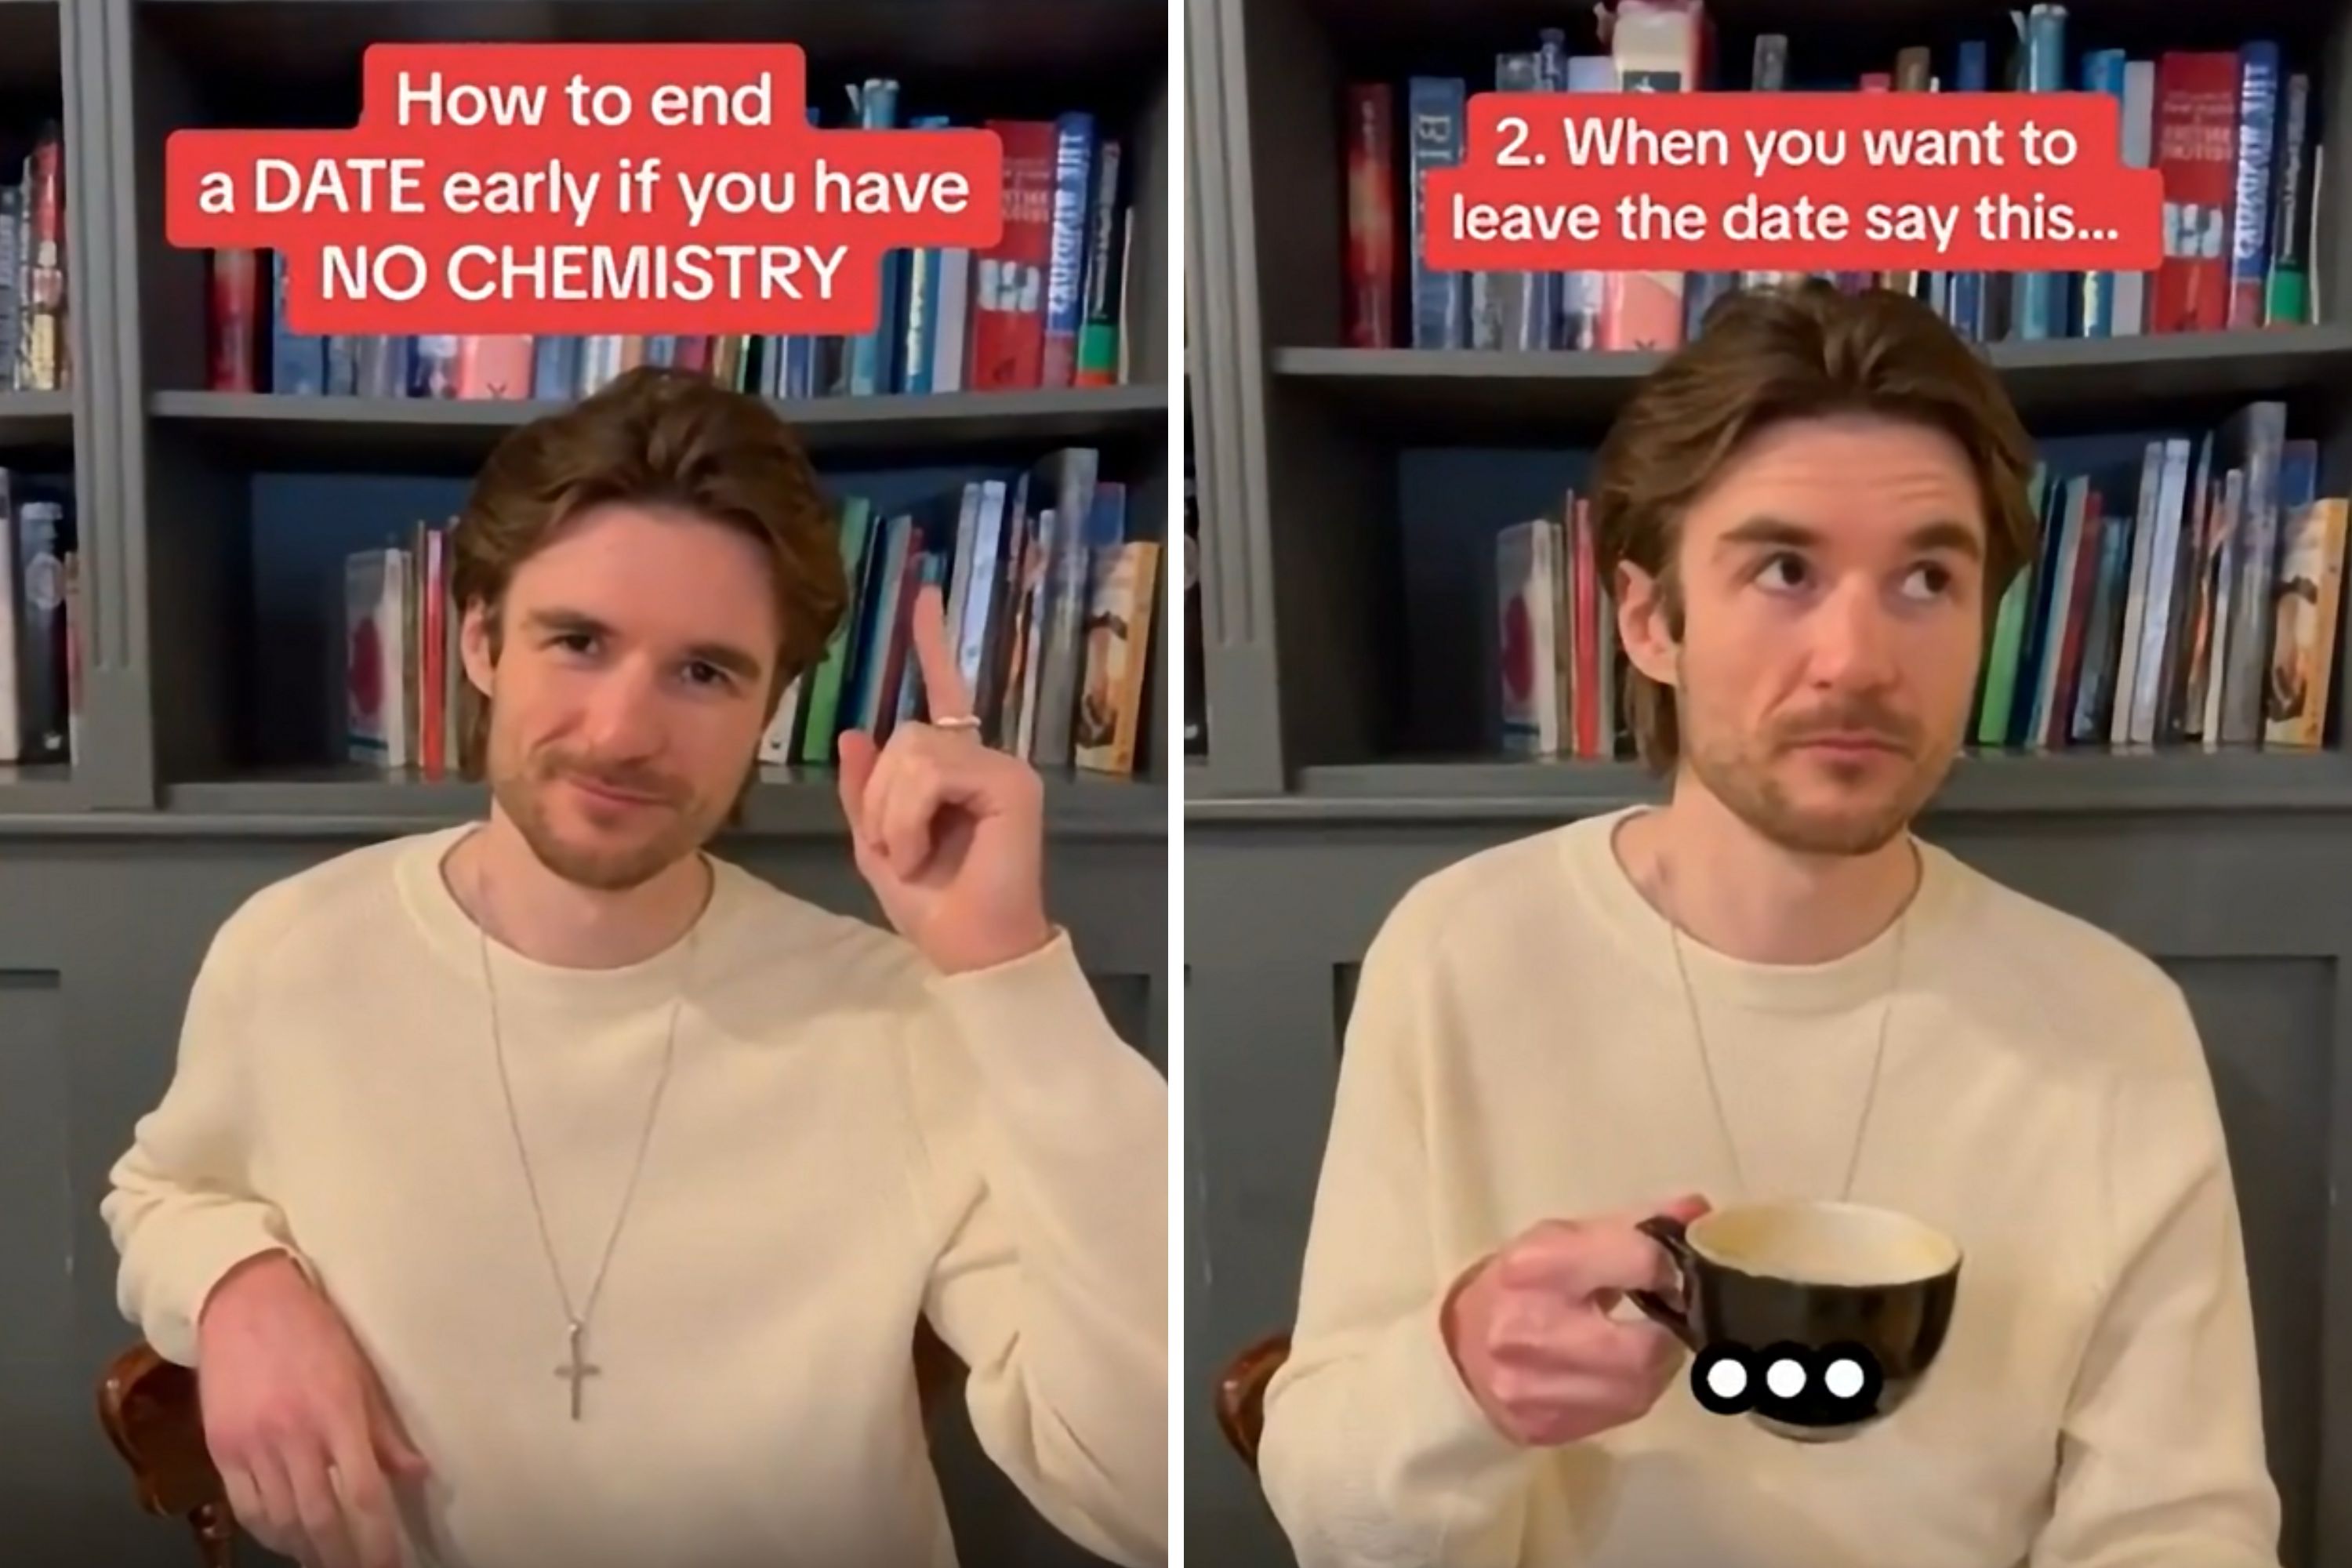 Dating coach reveals what to say to quickly end date with zero chemistry